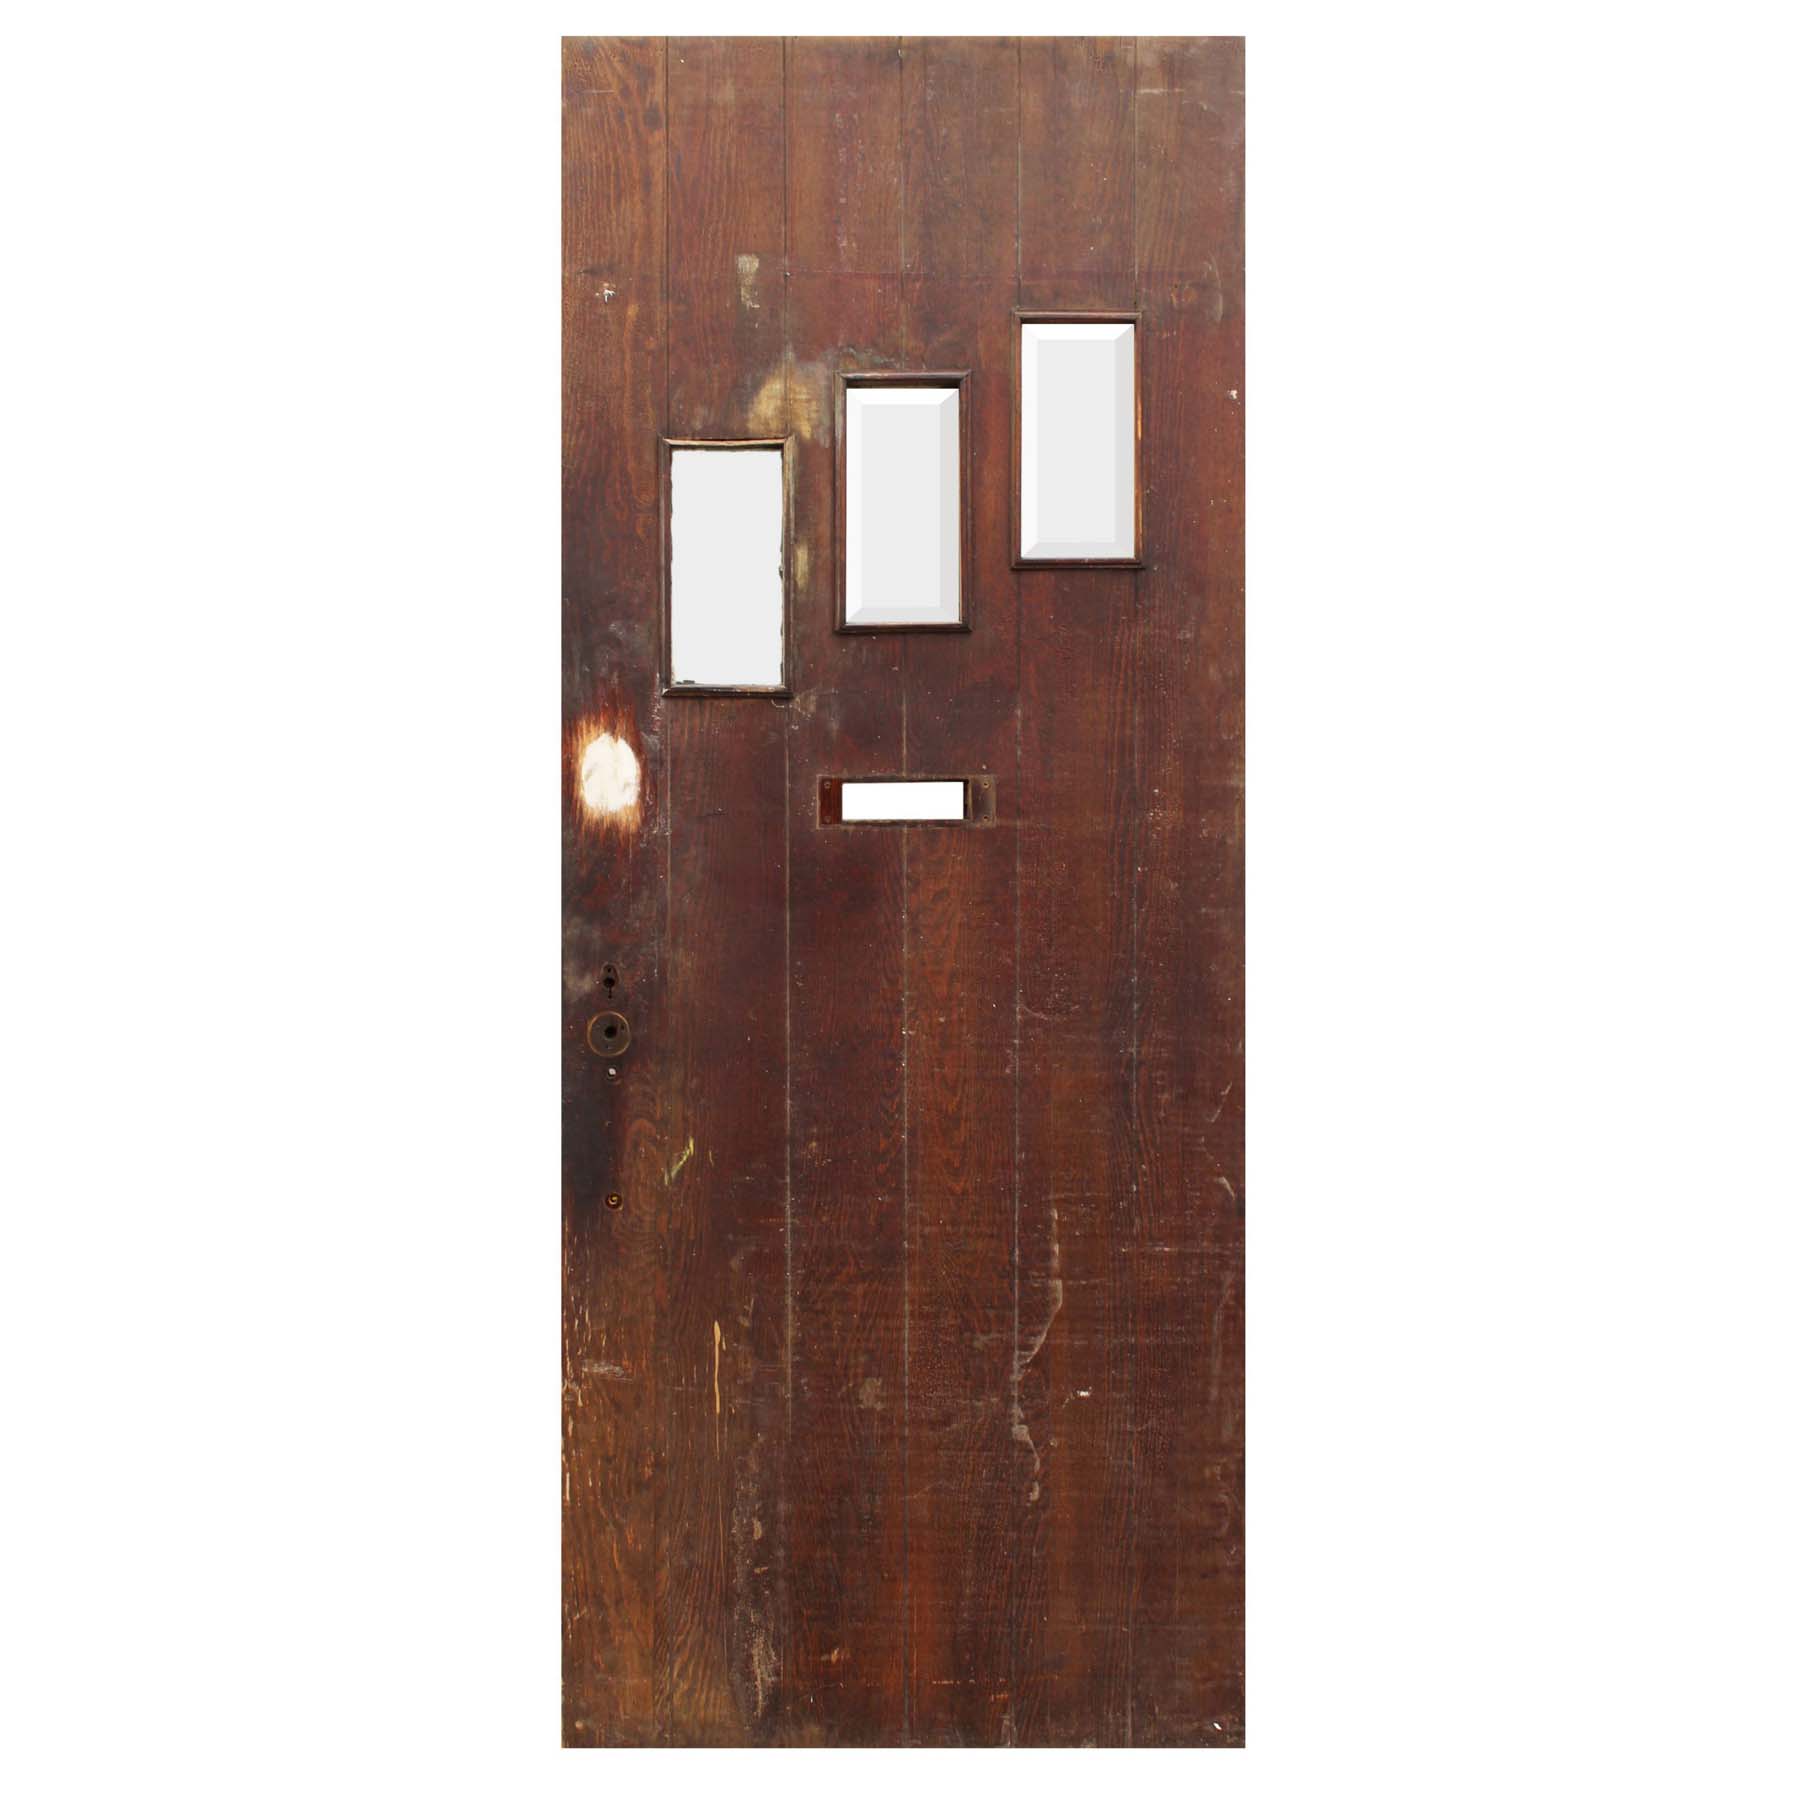 Salvaged 34” Plank Door with Beveled Glass-61564